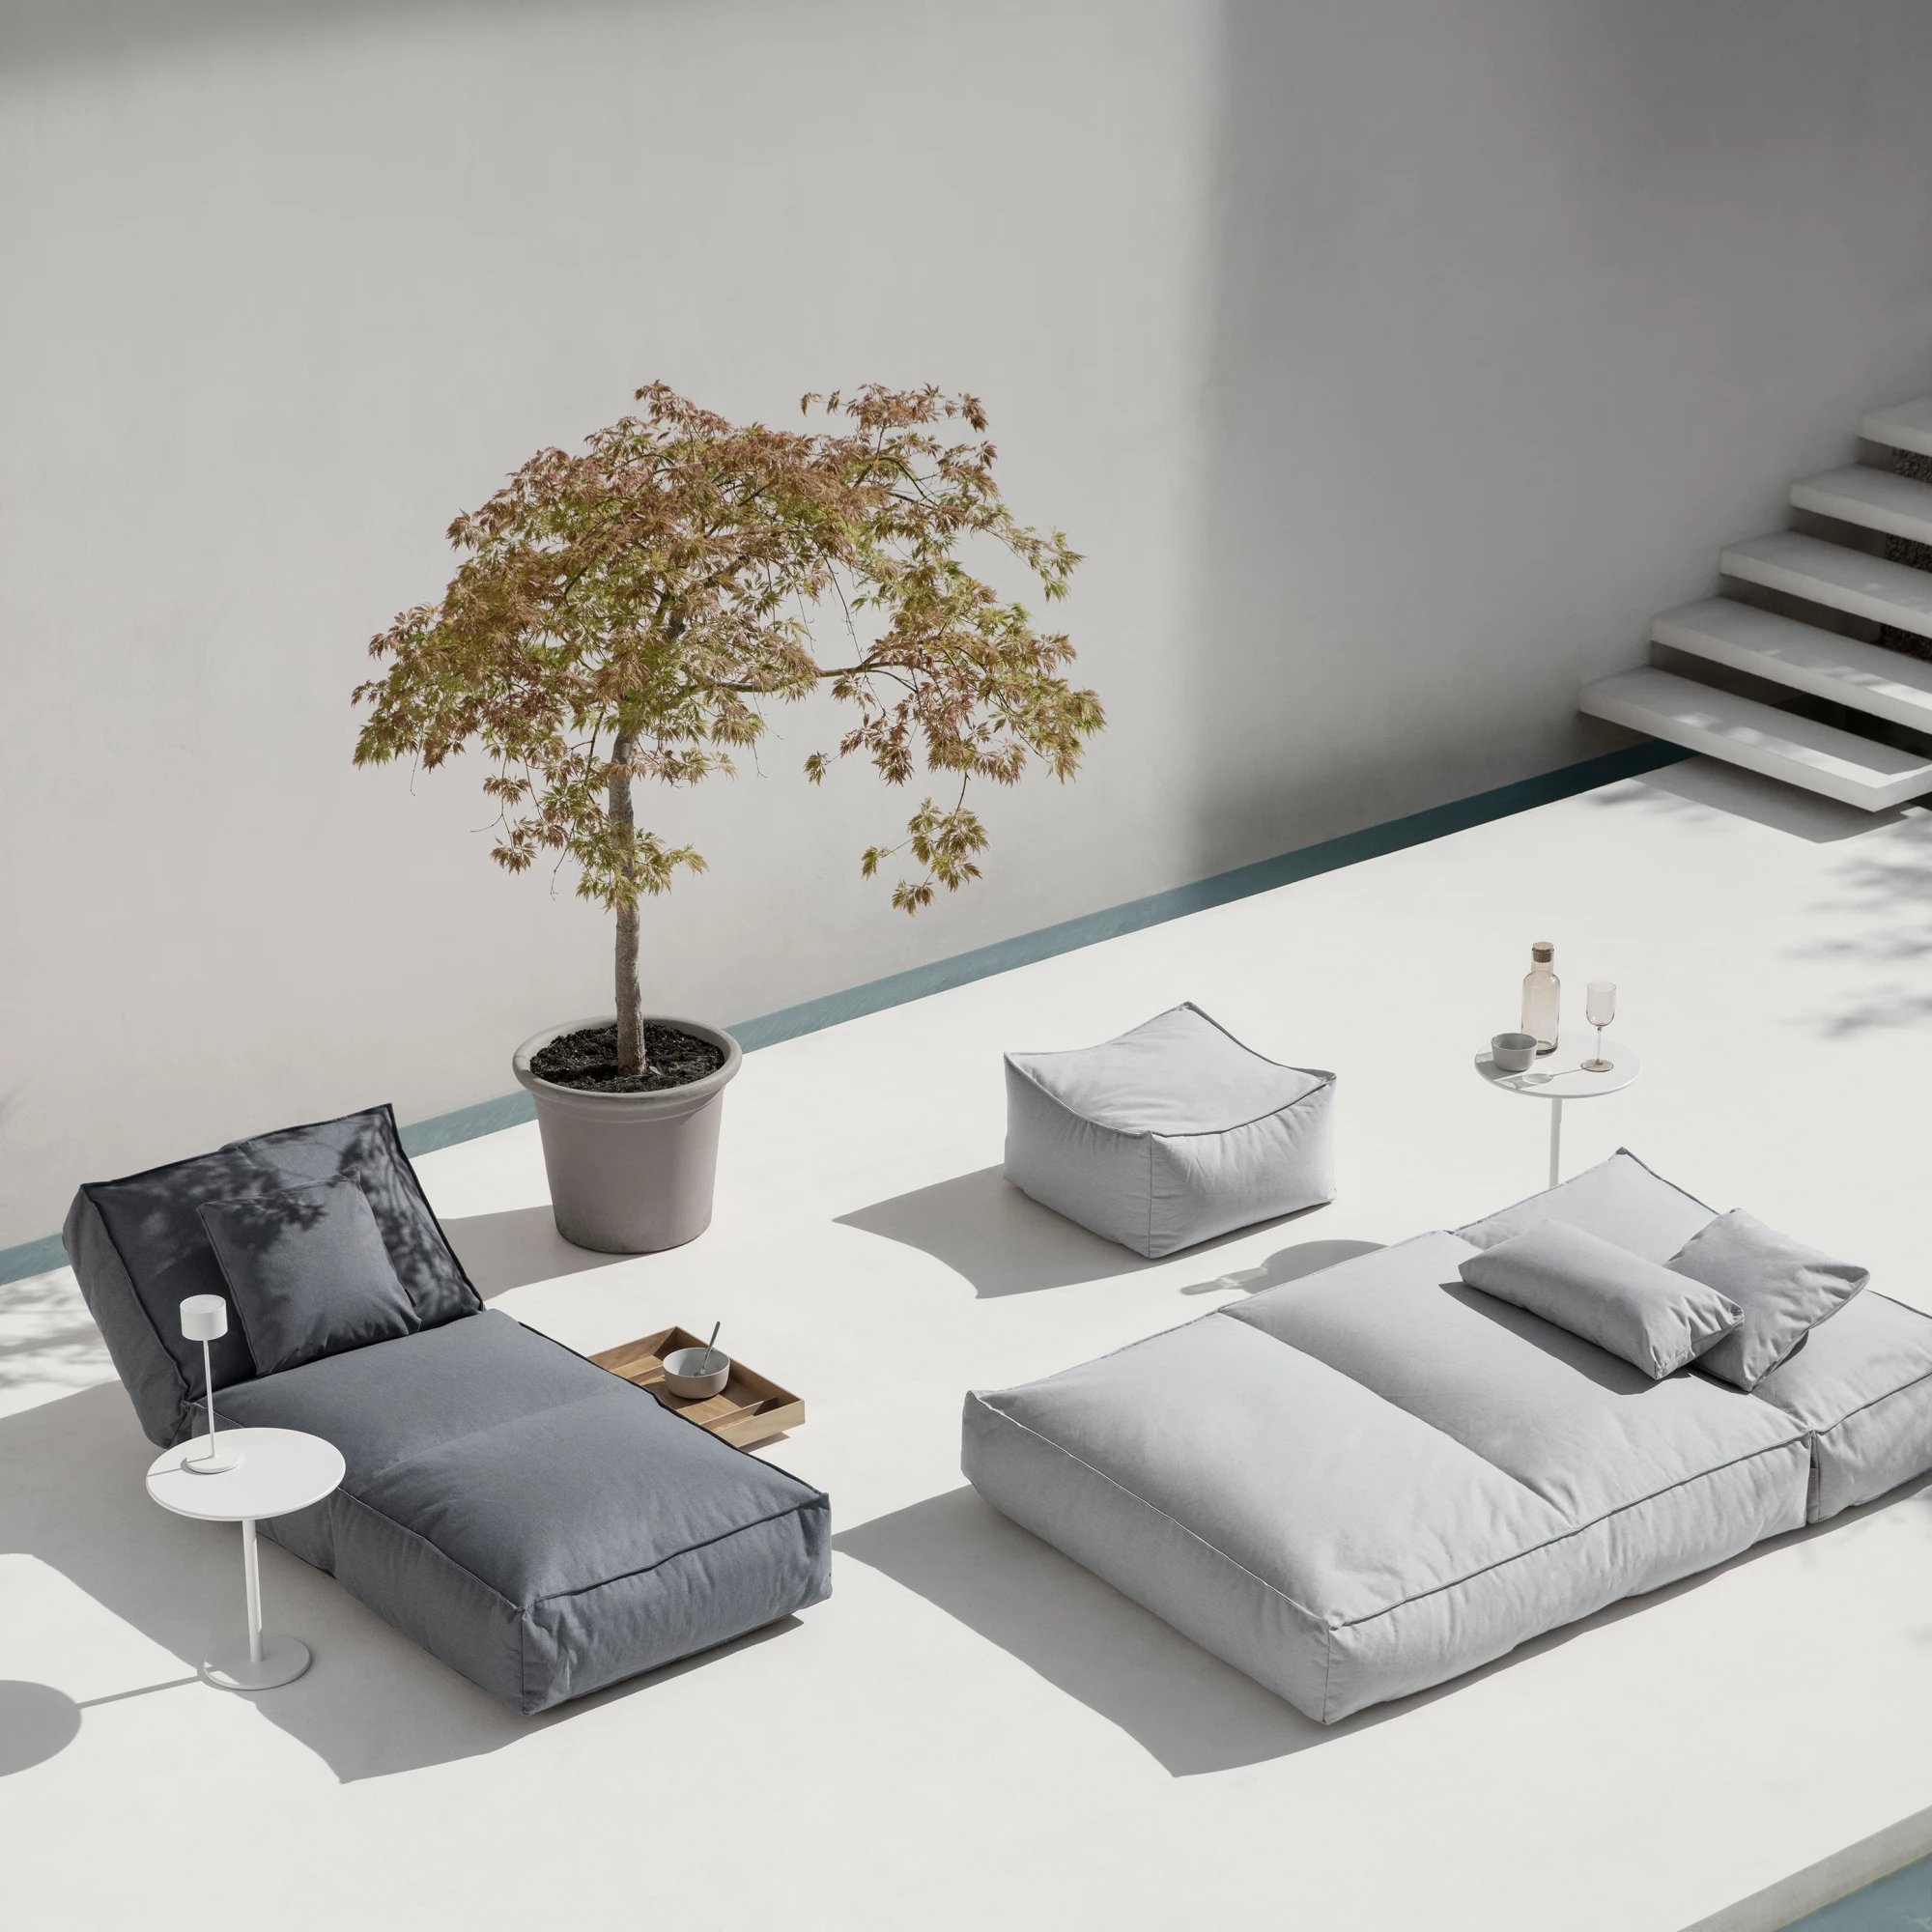 BLOMUS // STAY - OUTDOOR LOUNGER L | STONE